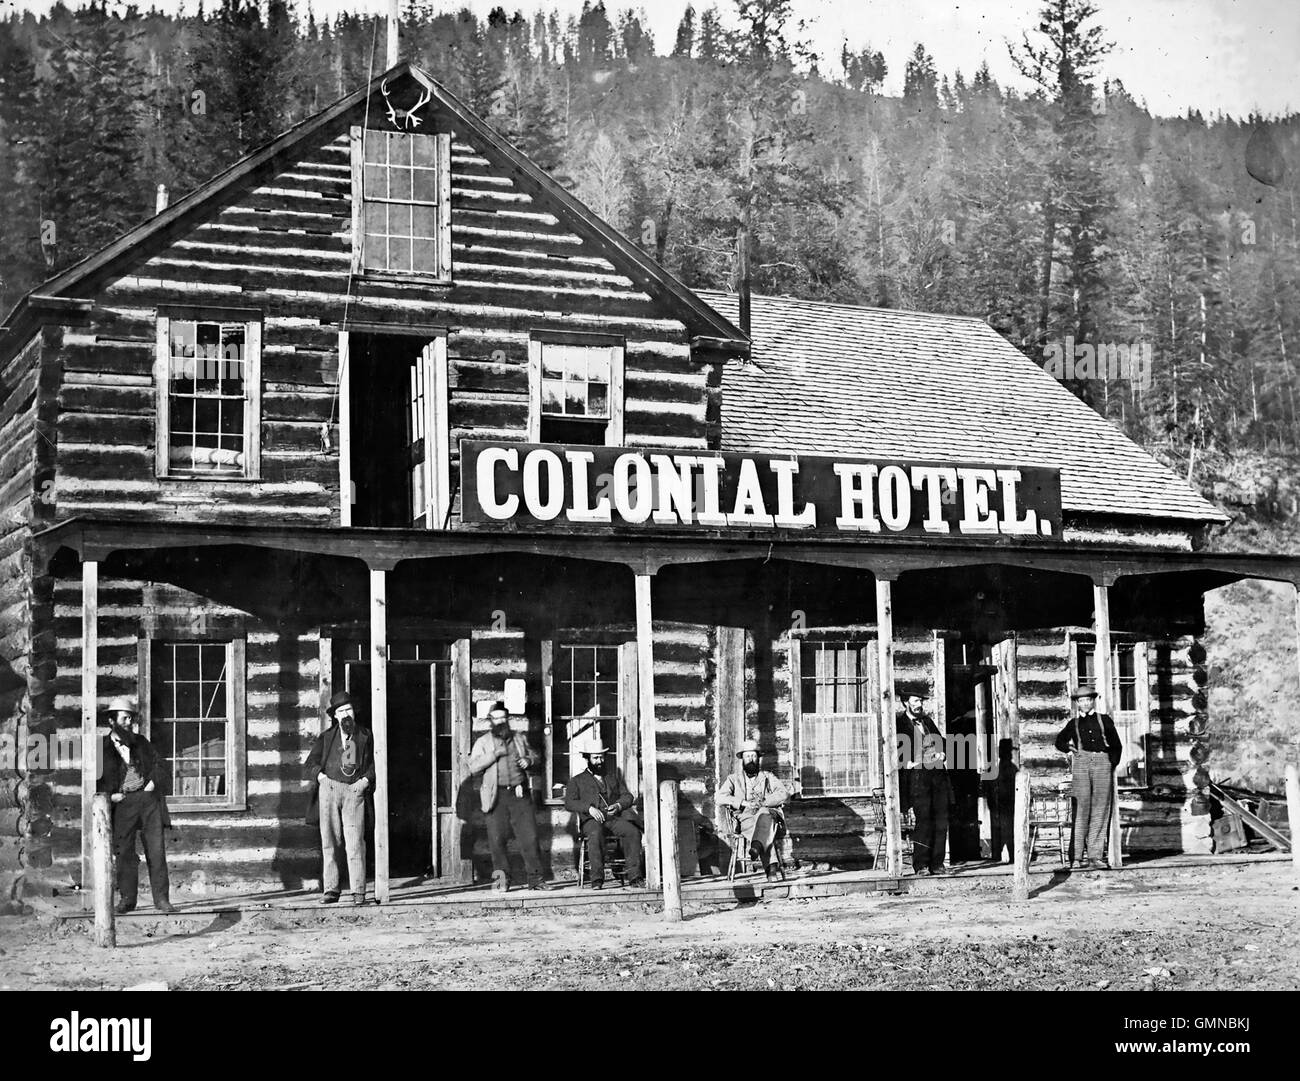 COLONIAL HOTEL at Soda Creek, British Columbia, Canada in 1868. Photo Frederick Daly  Creator: Dally, Frederick  Date Created: [1867 or 1868]  Source: Original Format: University of British Columbia. Library. Rare Books and Special Collections. Langmann Collection.  Permanent URL: http://digitalcollections.library.ubc.ca/cdm/ref/collection/langmann/id/353  Project Website:http://digitalcollections.library.ubc.ca/cdm/landingpage/collection/langmann Stock Photo